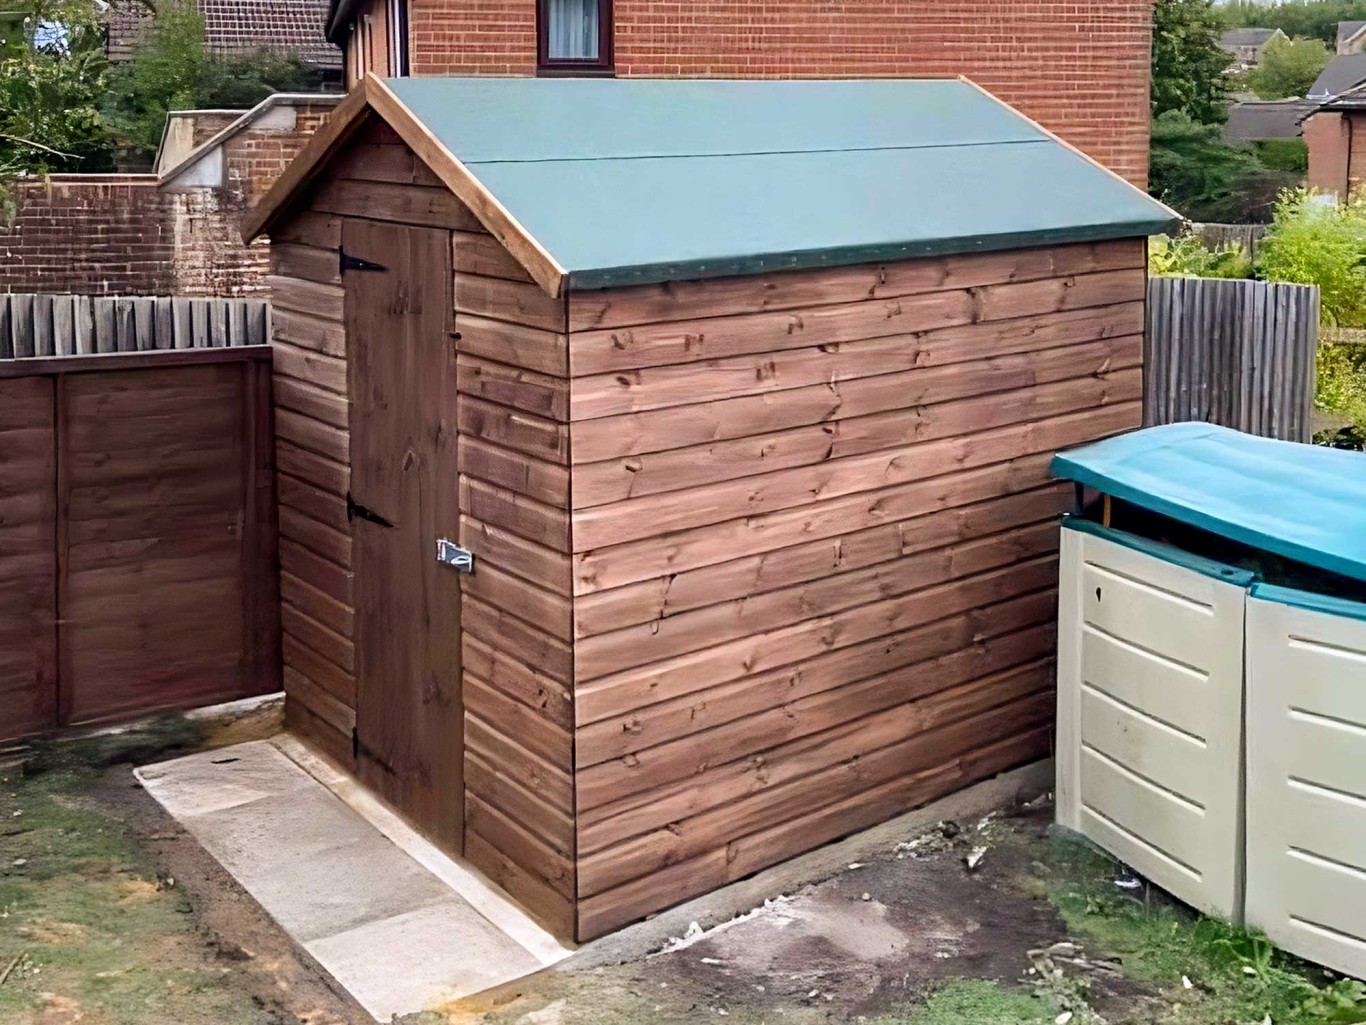 Medium sized garden shed with apex roof.